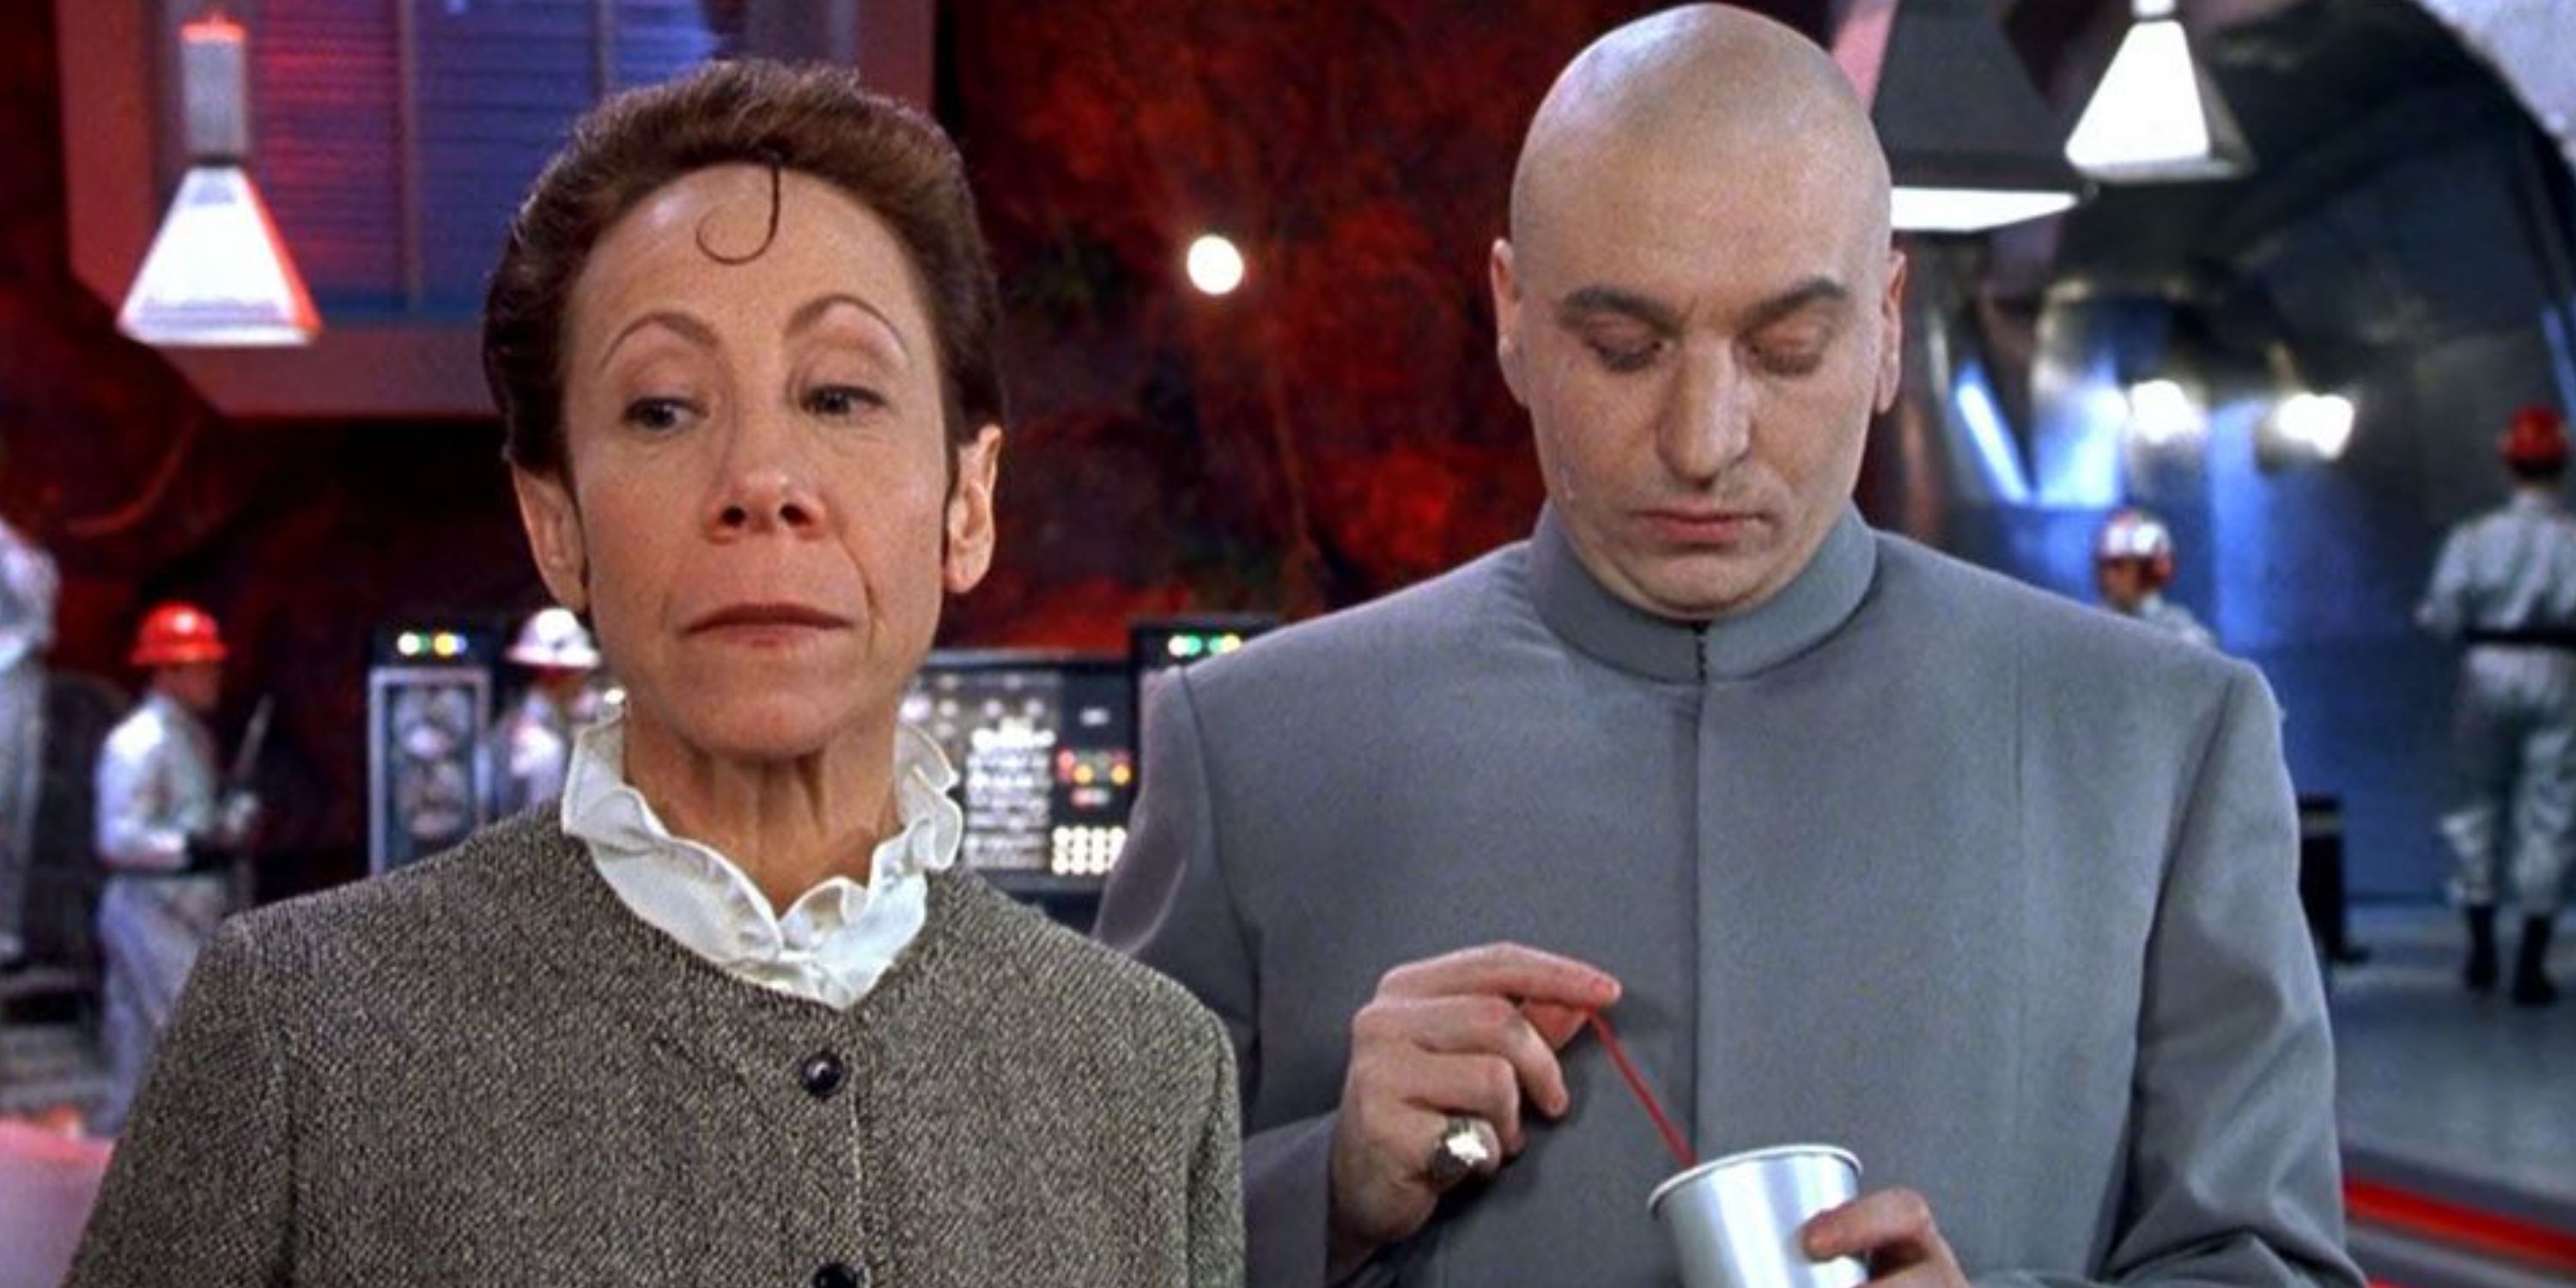 Dr. Evil with his trusted lieutenant Frau, he looking down she looking away in a scene from Austin Powers